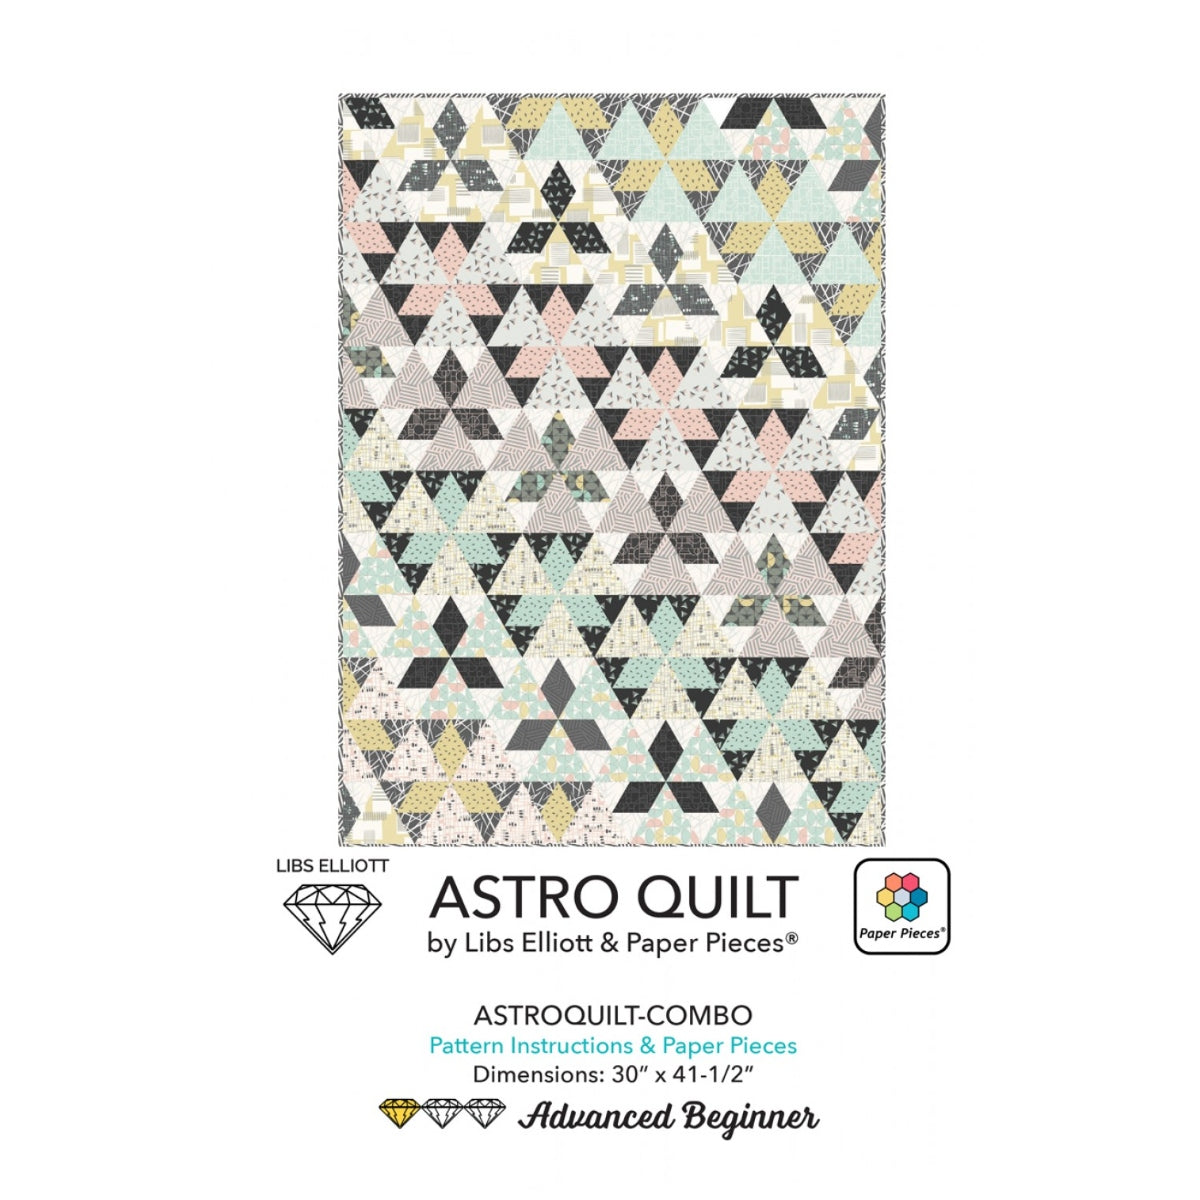 The shapes in ASTRO play together to create depth and the fun illusion of layered triangles. ASTRO was designed for Libs' Rancho Relaxo fabric collection with Andover Fabrics but works well with a variety of small to medium prints or solids. ASTRO measures 30"x 41-1/2" so it's perfect as a crib-size quilt or wall-hanging project.  Printed Paper Pattern Finished Size: 30in x 41-1/2in Paper Templates Included Final Product: quilt Technique Used: English Paper Piecing Skill Level: Confident Beginner